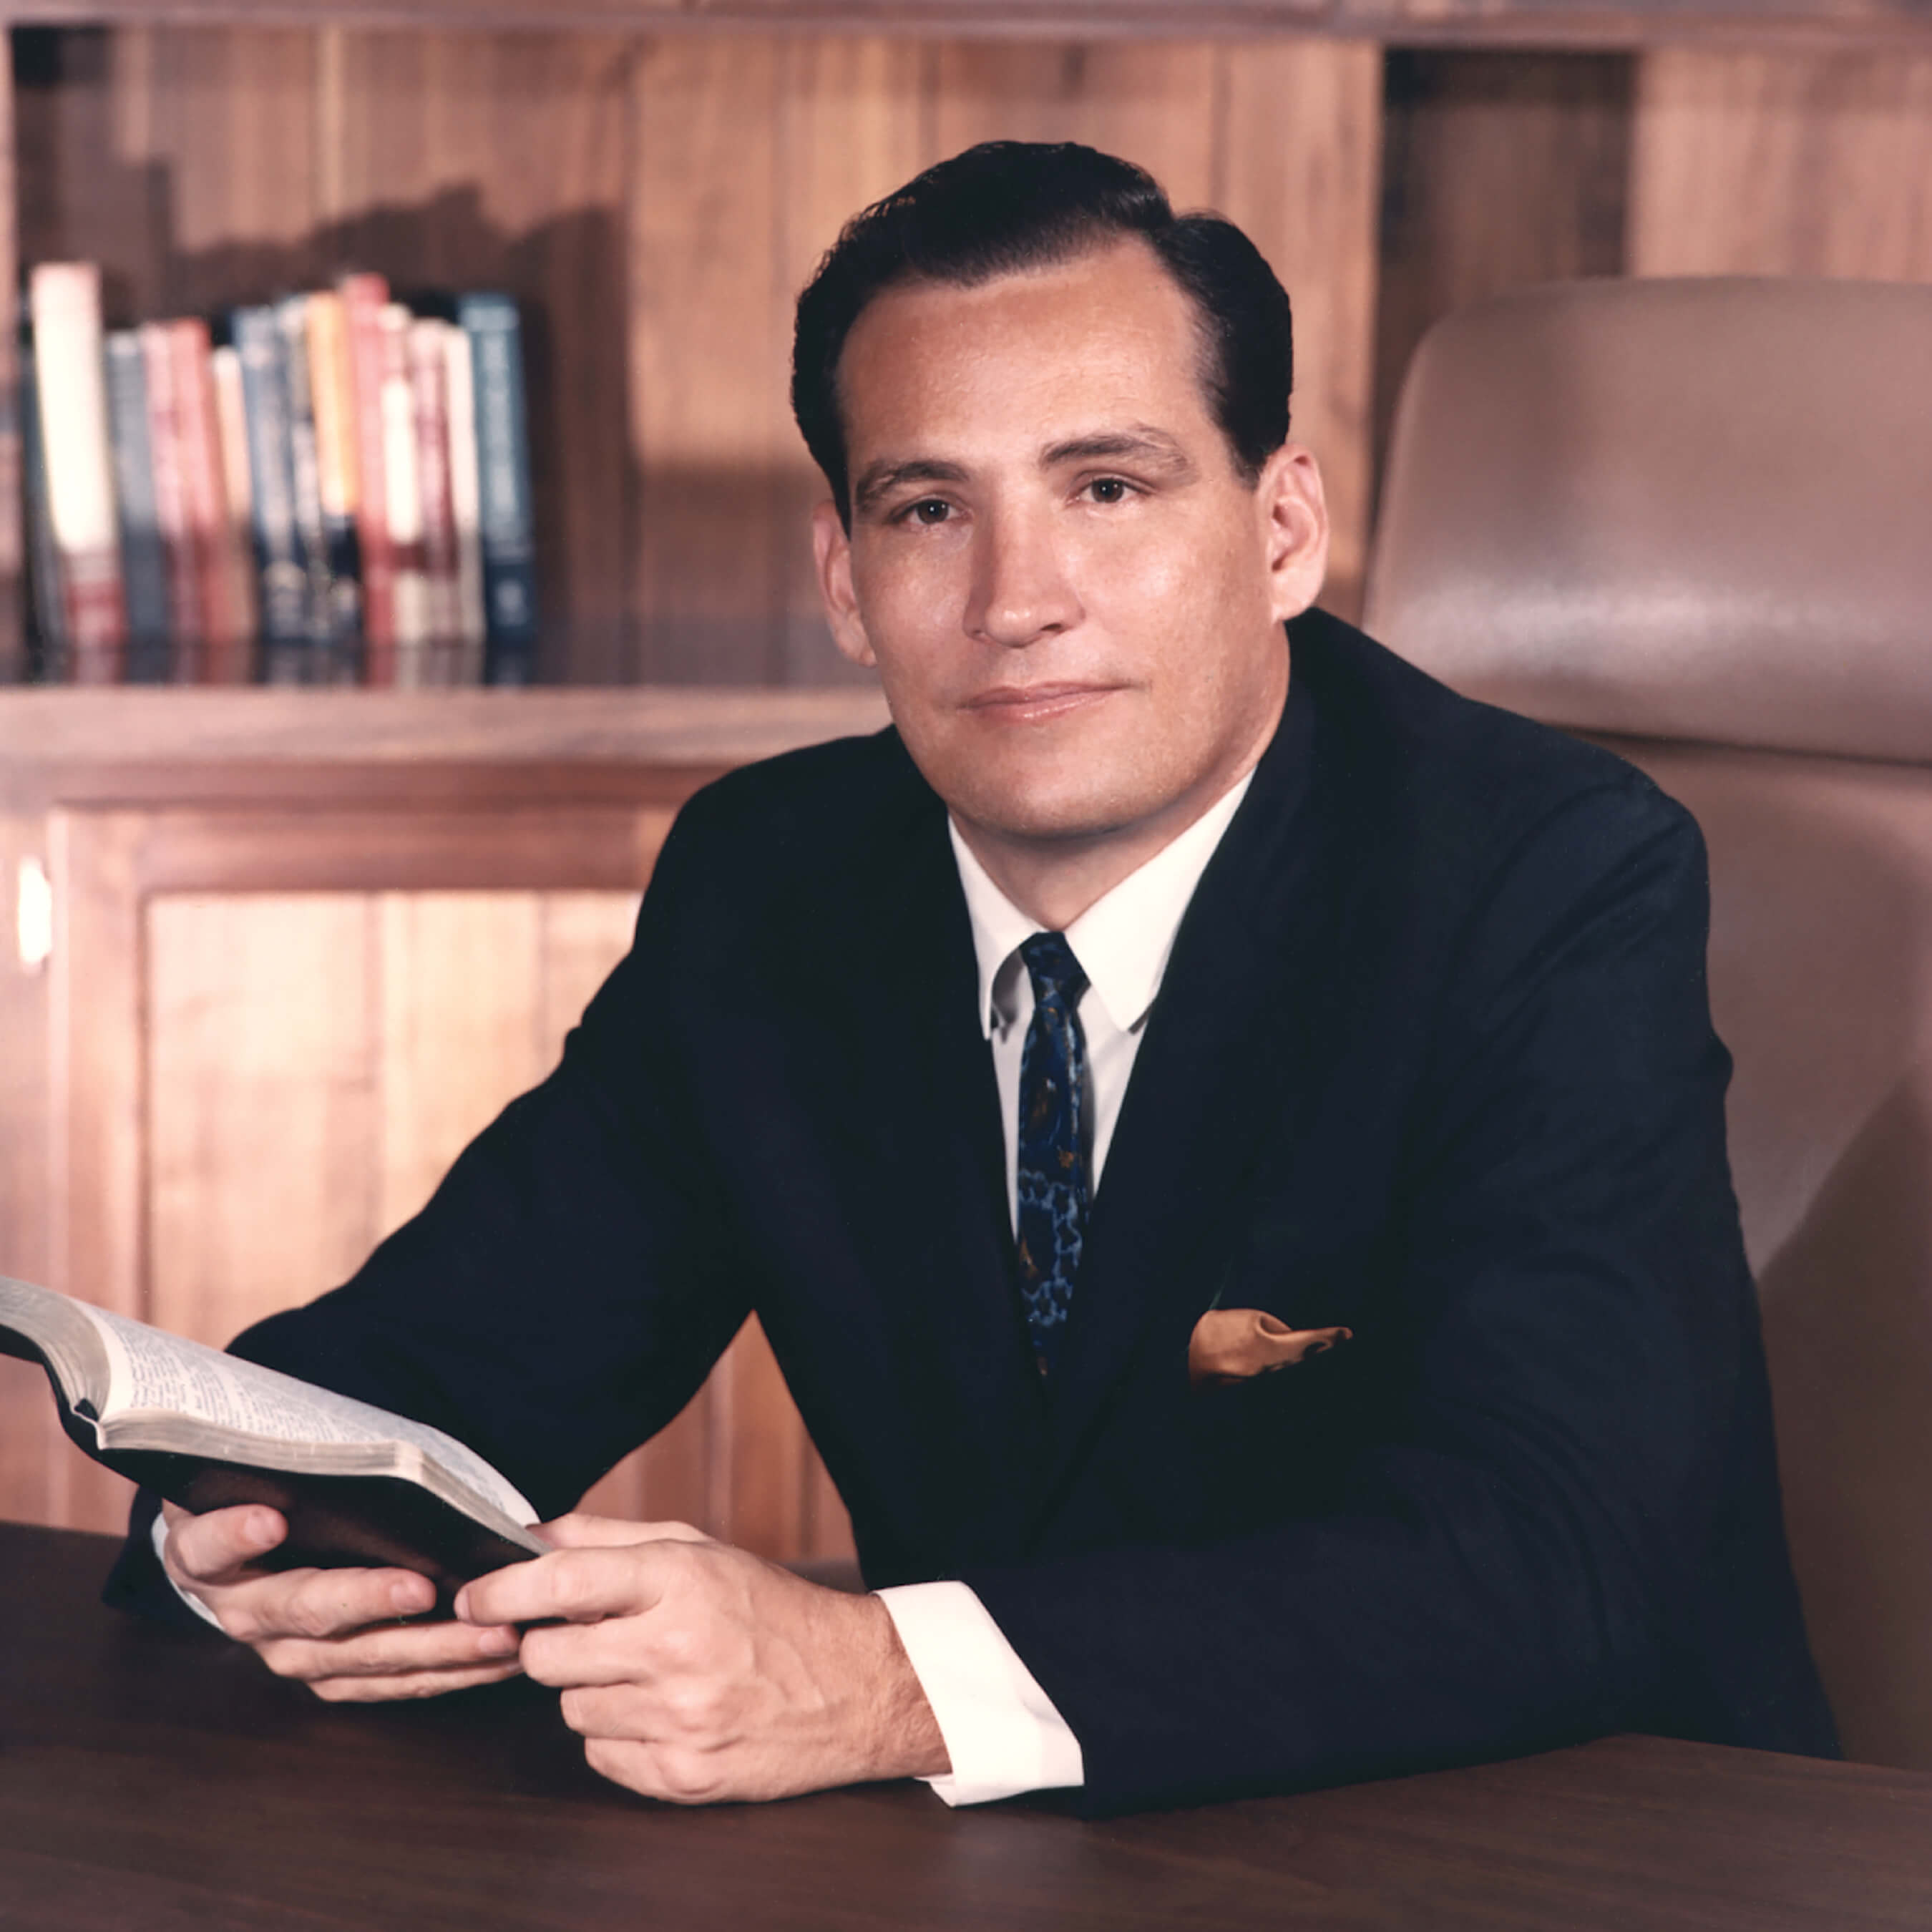 Merritt Island Years: Collection of Sermons by Adrian Rogers at First Baptist Church